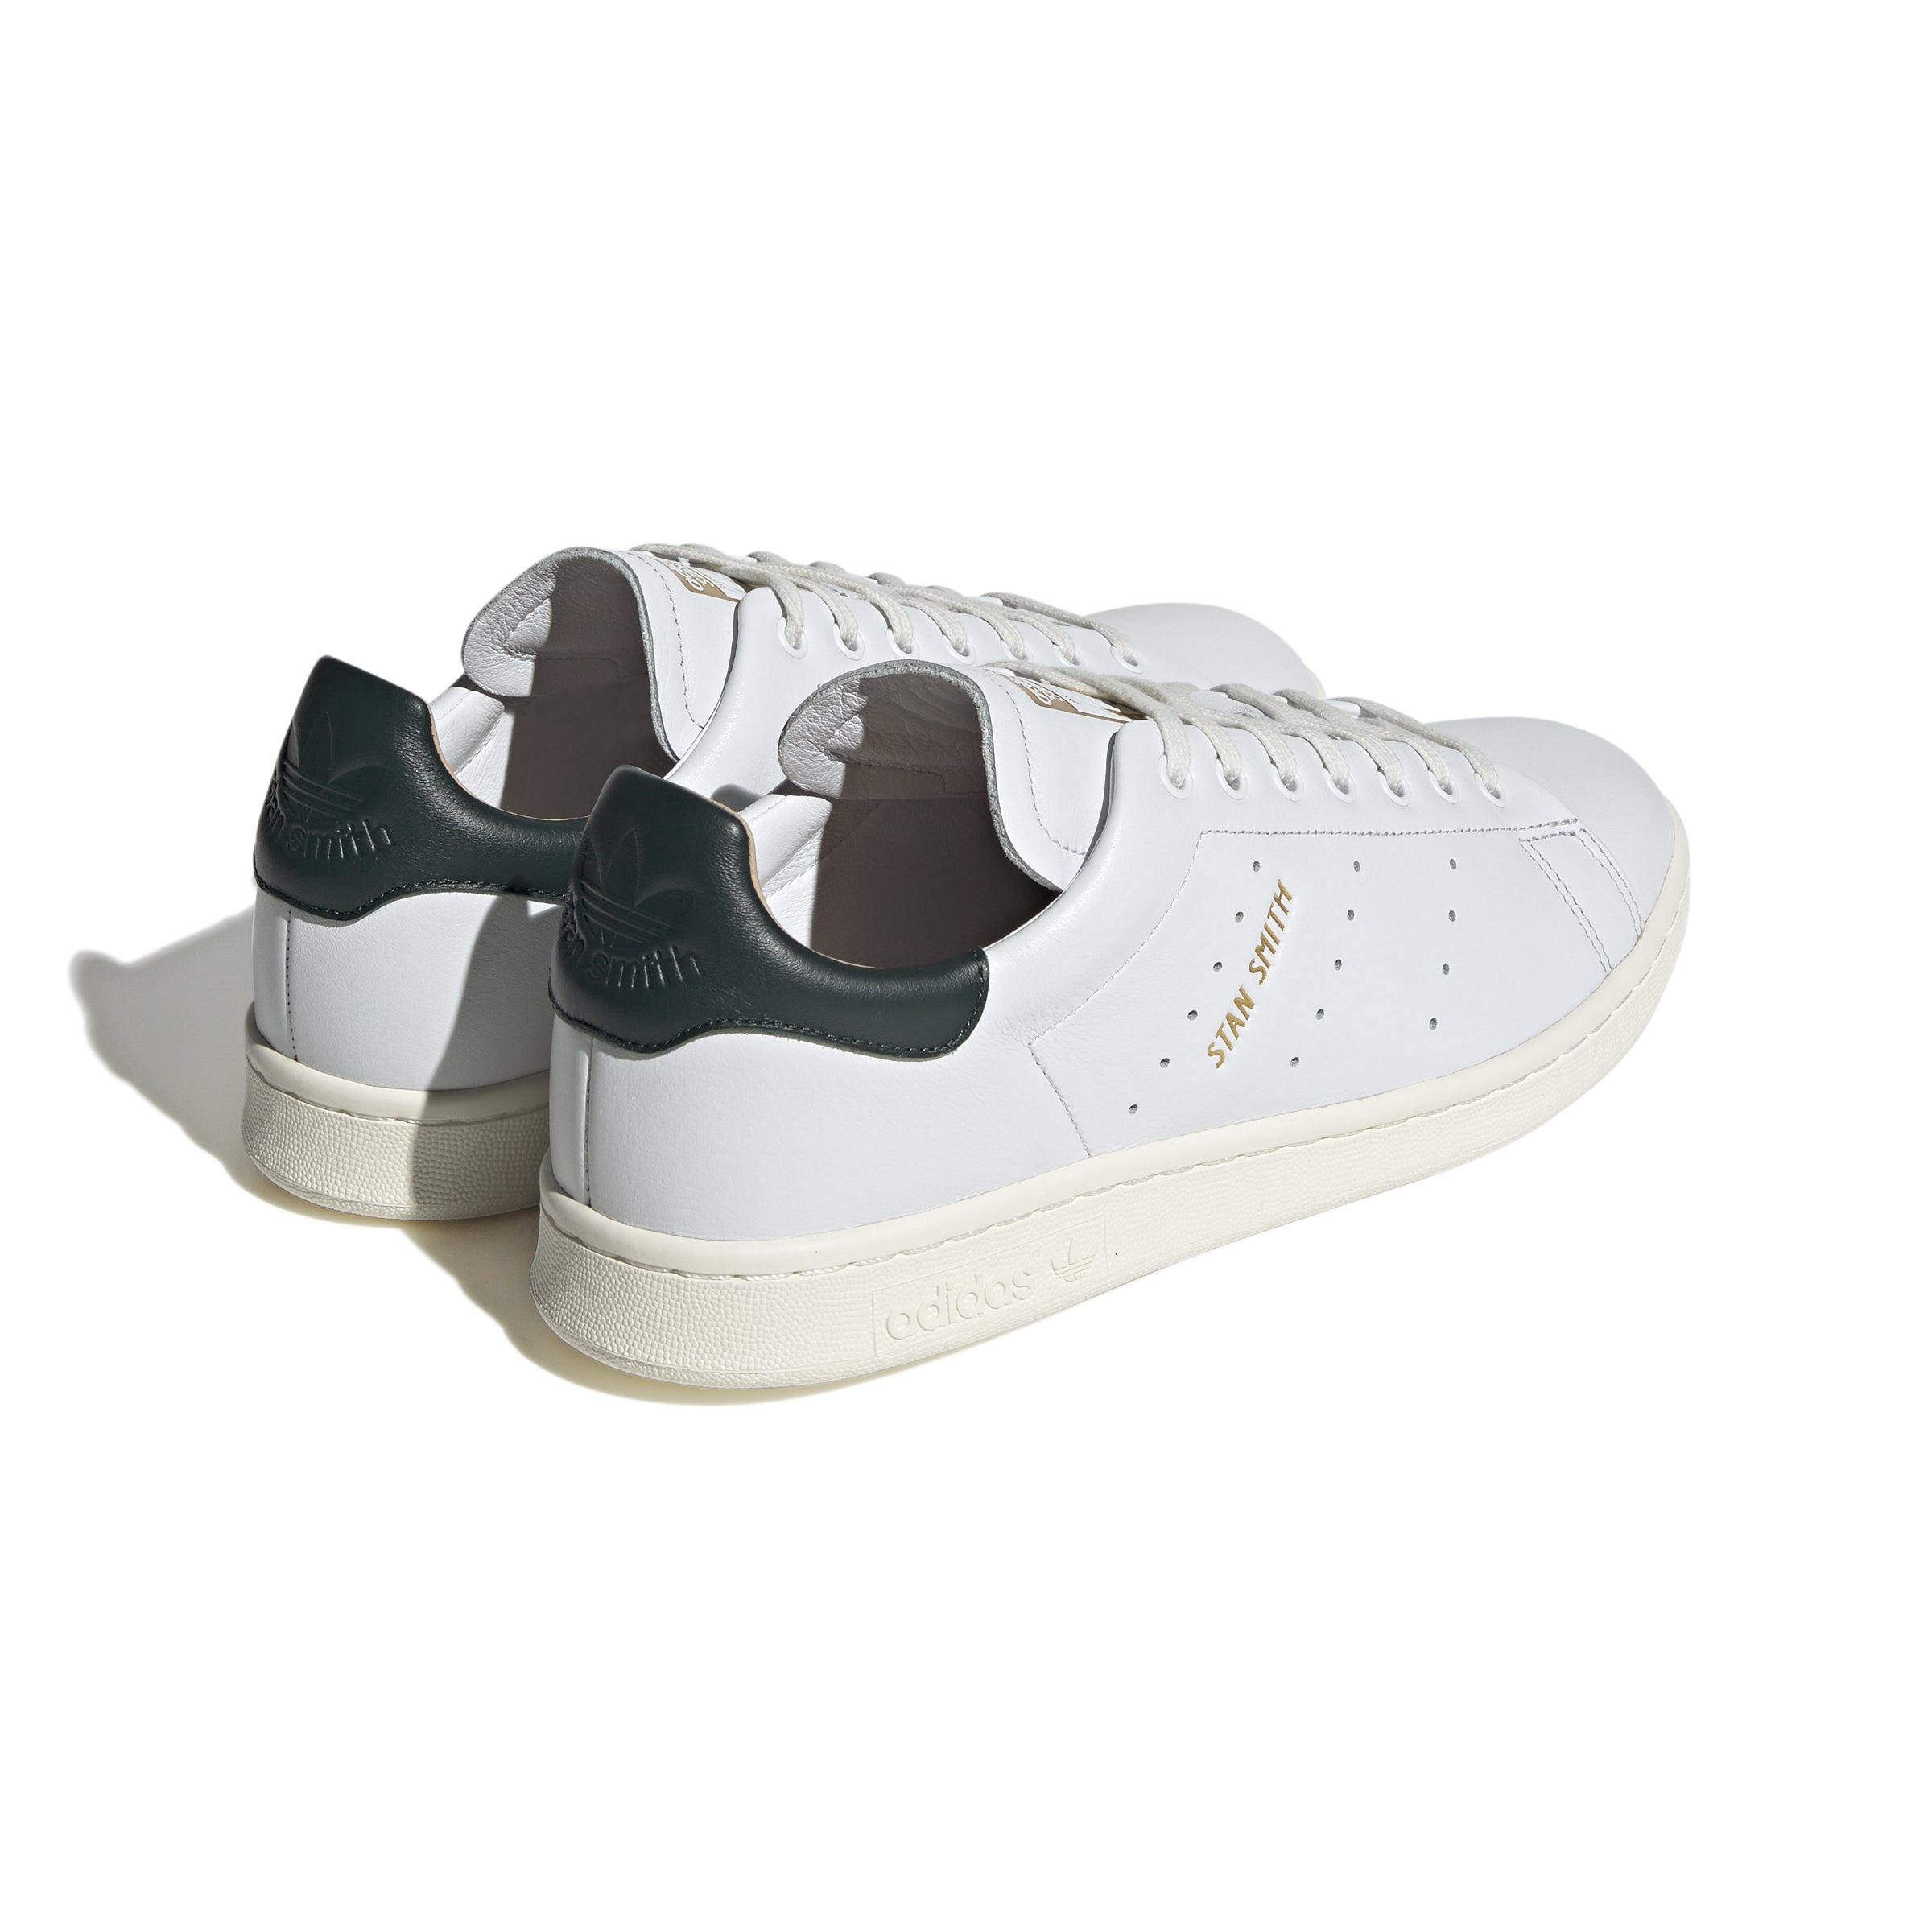 ADIDAS STAN SMITH LUX HP2201 SNEAKER (M)